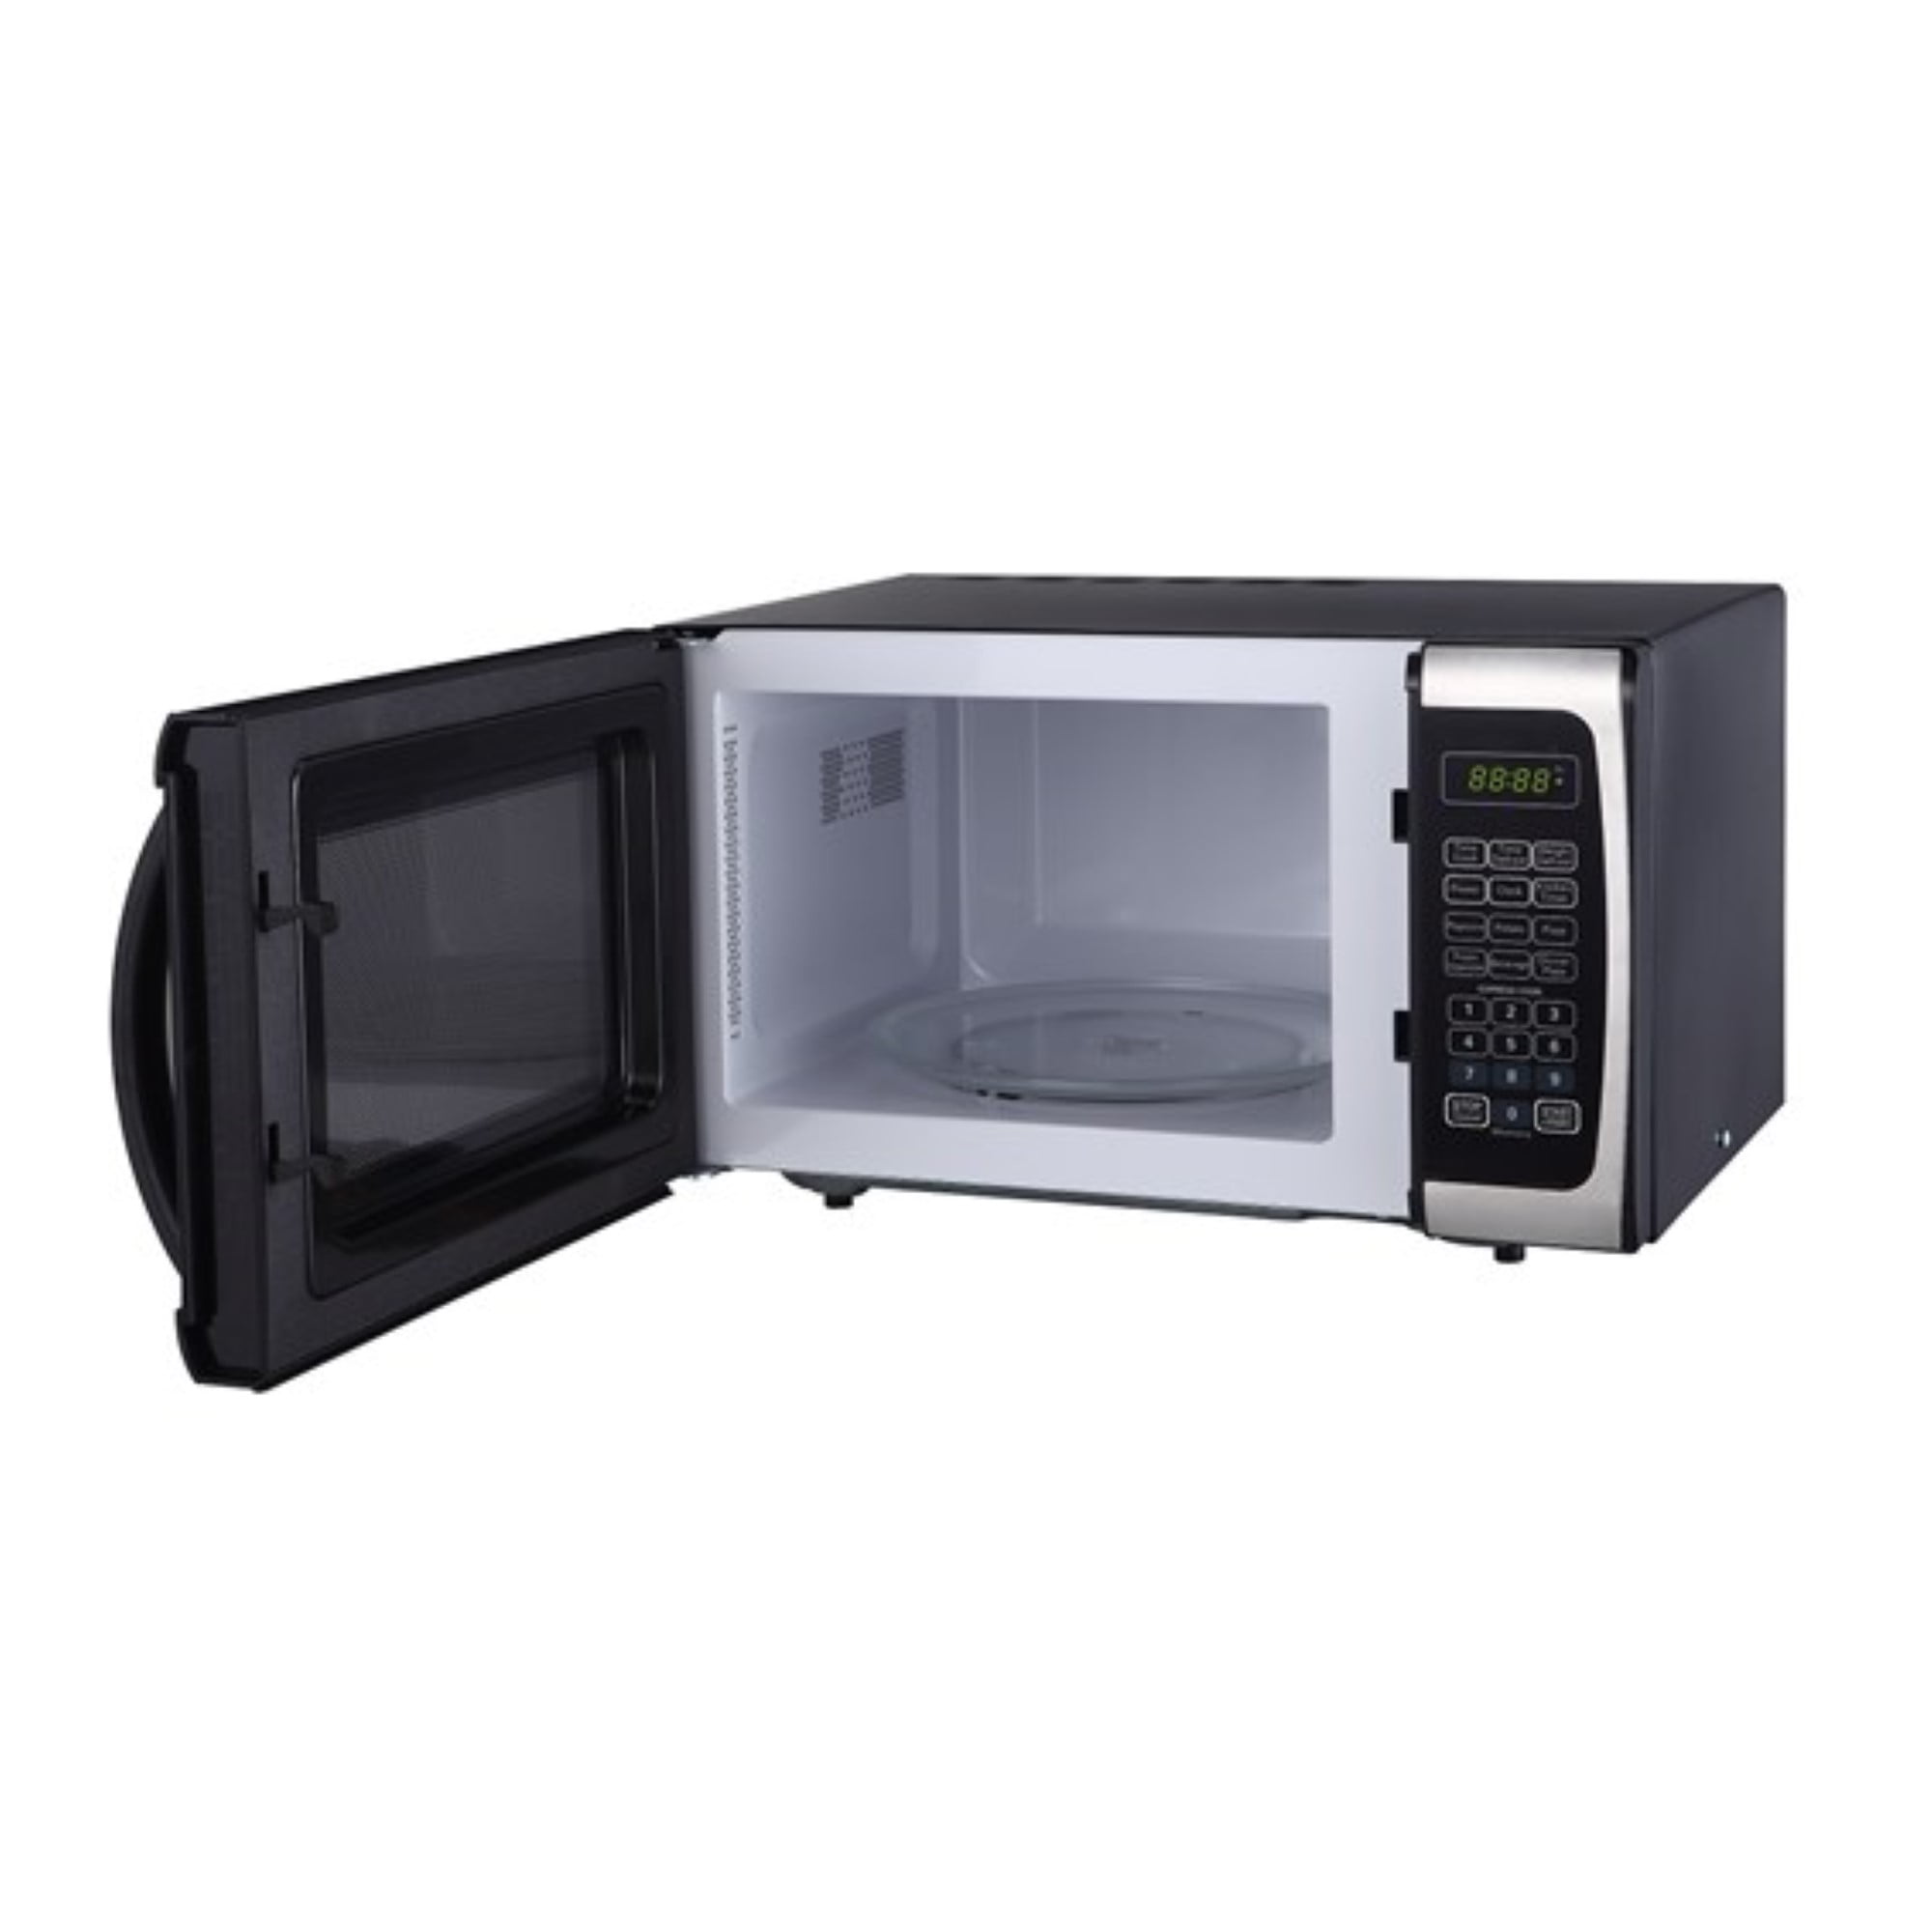 Emerson 0.9 Cubic Foot Microwave Oven, 1 Count - Fred Meyer